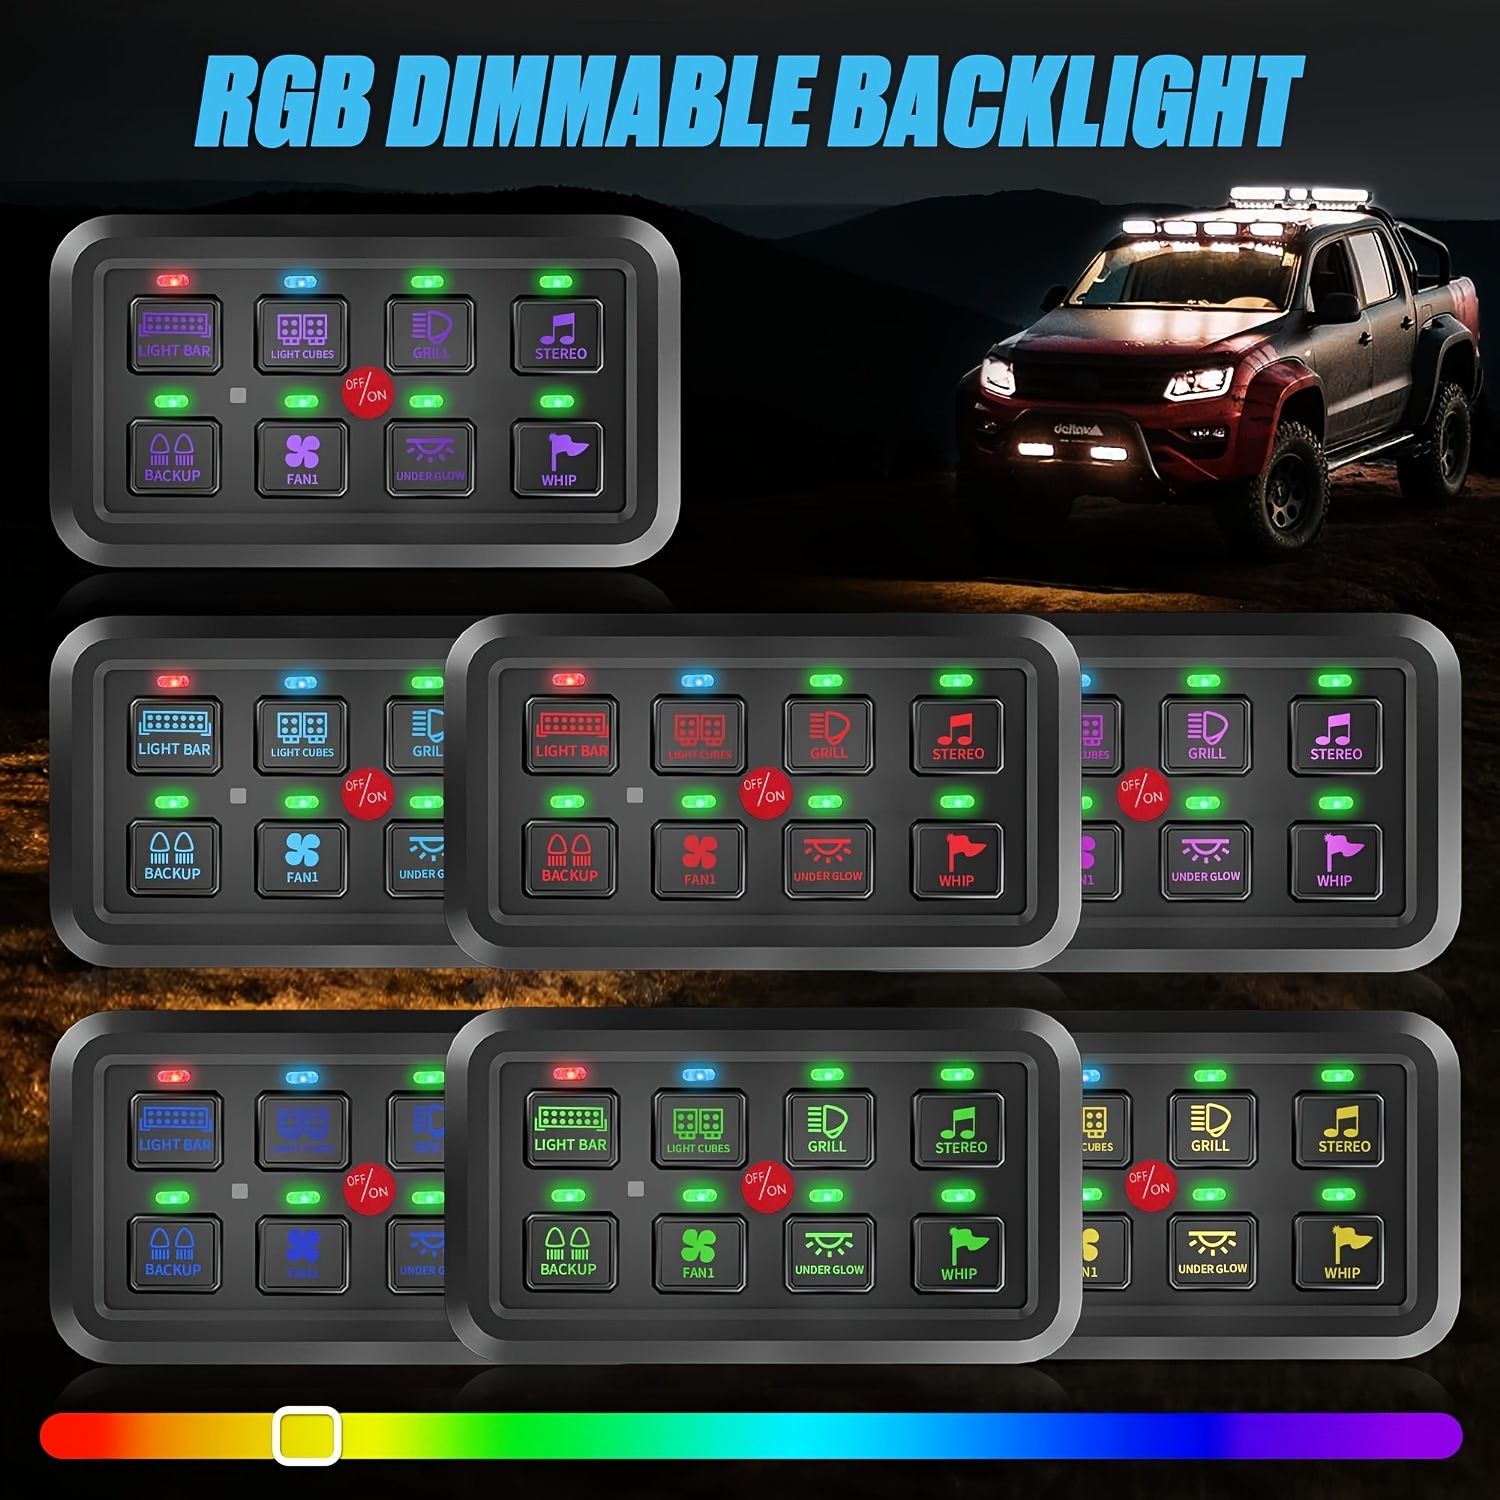 8 Gang Switch Pane Automatic Dimmable Switch Rgb Back Light Panel